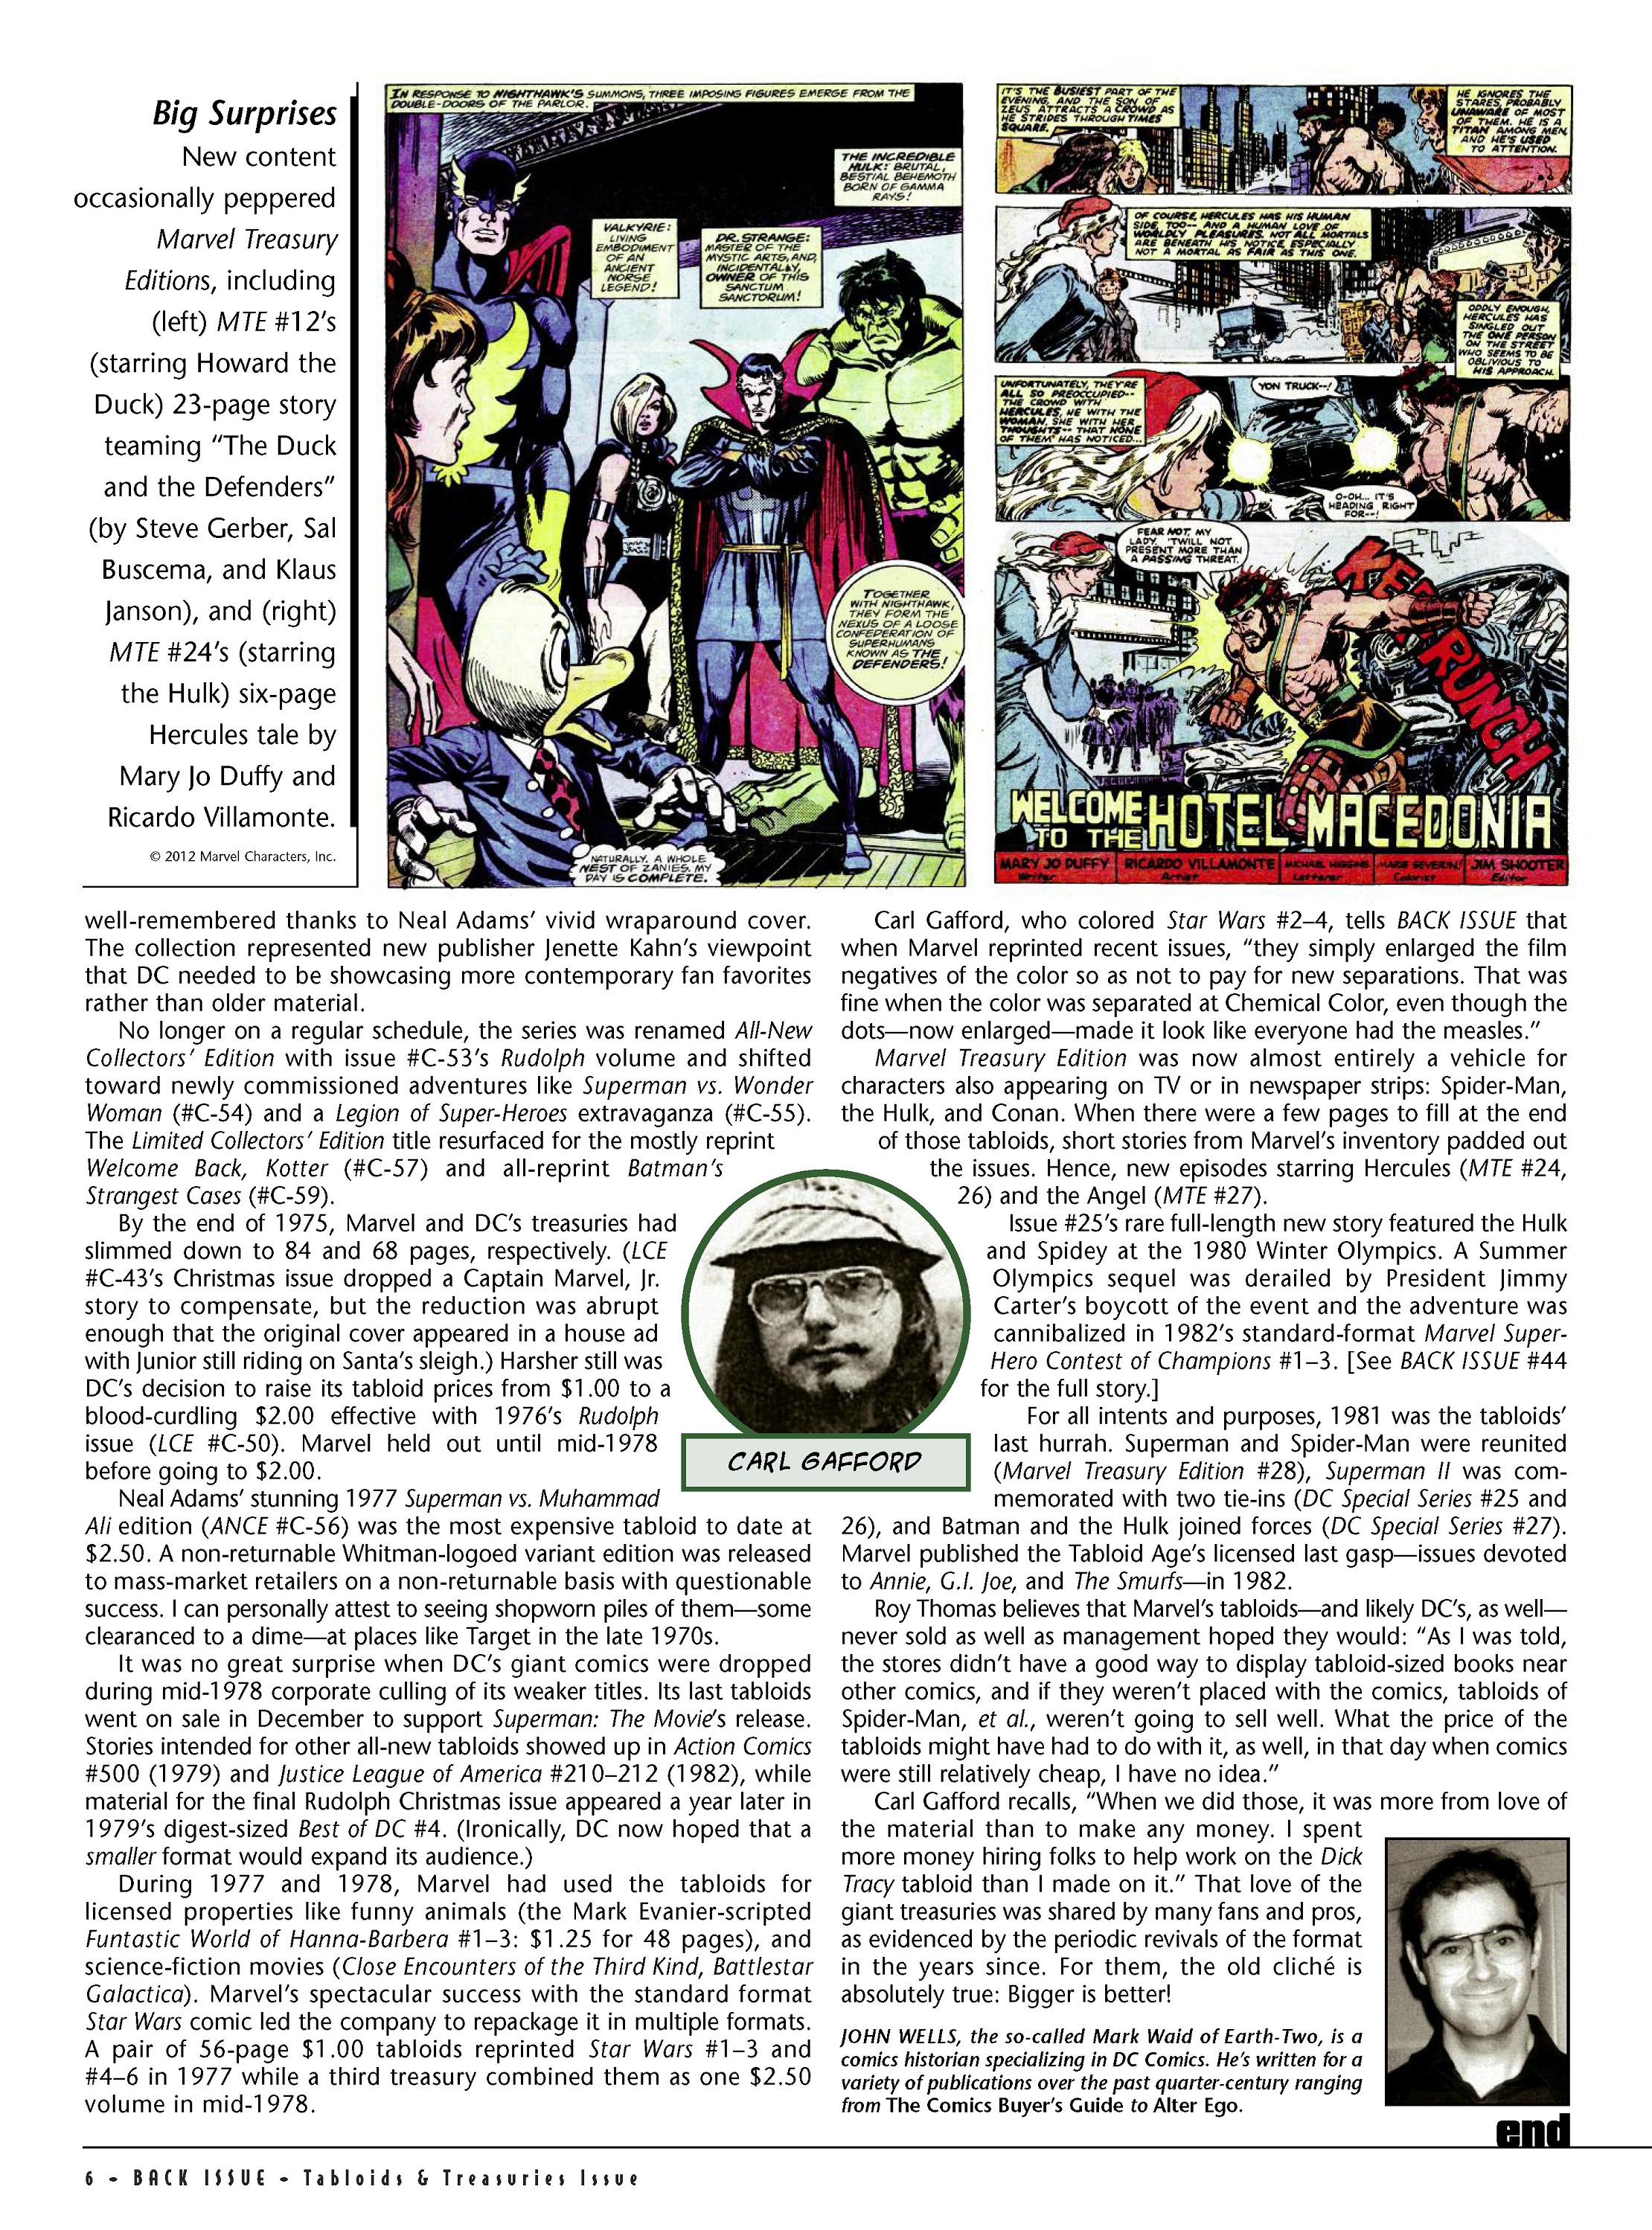 Read online Back Issue comic -  Issue #61 - 8